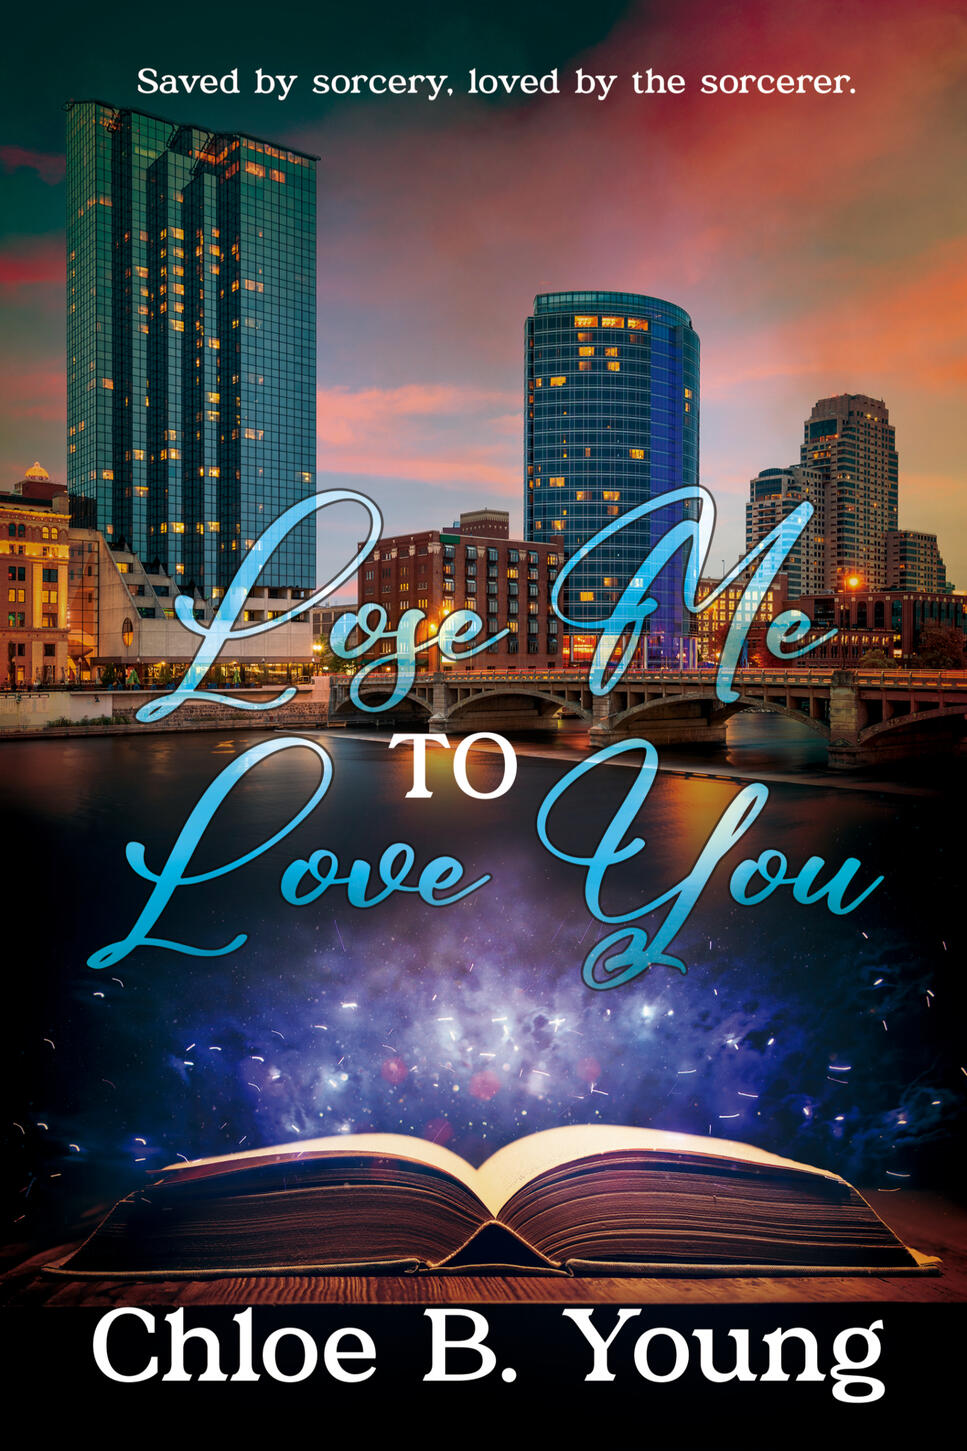 Book cover with lit skyscrapers and twilight sky above open book. The cover reads Lose Me to Love You - Chloe B Young